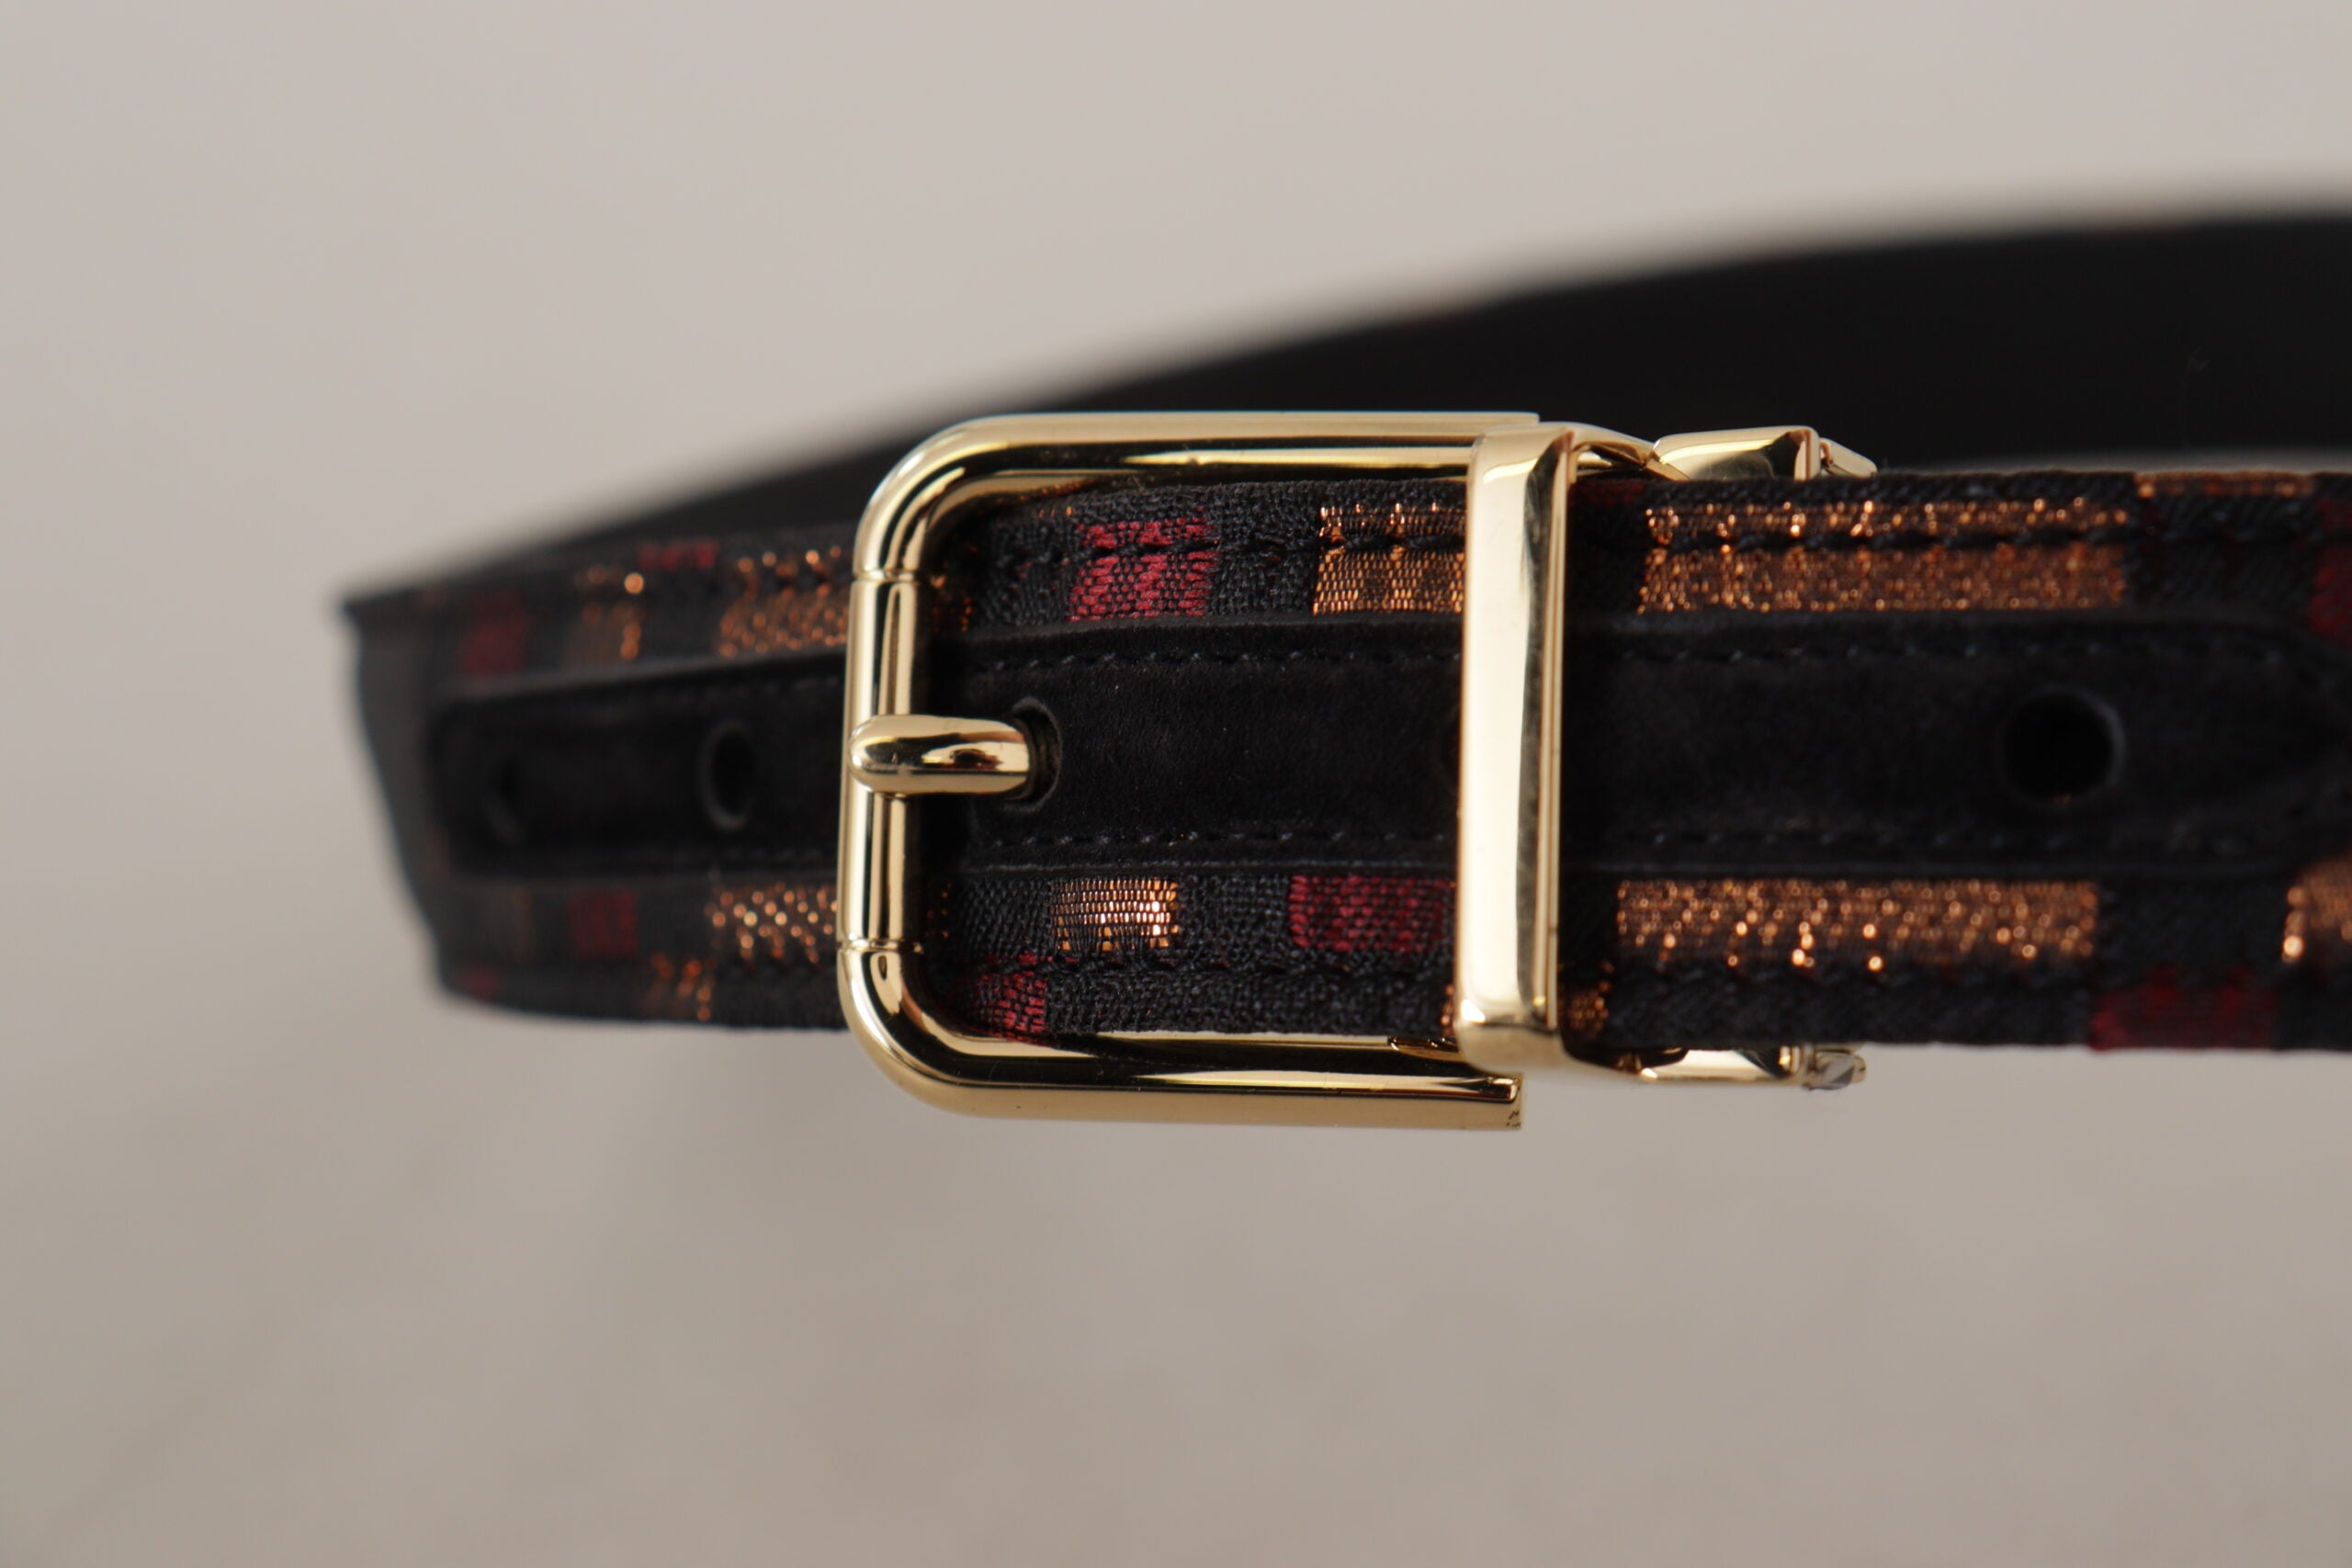 Dolce & Gabbana Multicolor Leather Belt with Gold Buckle